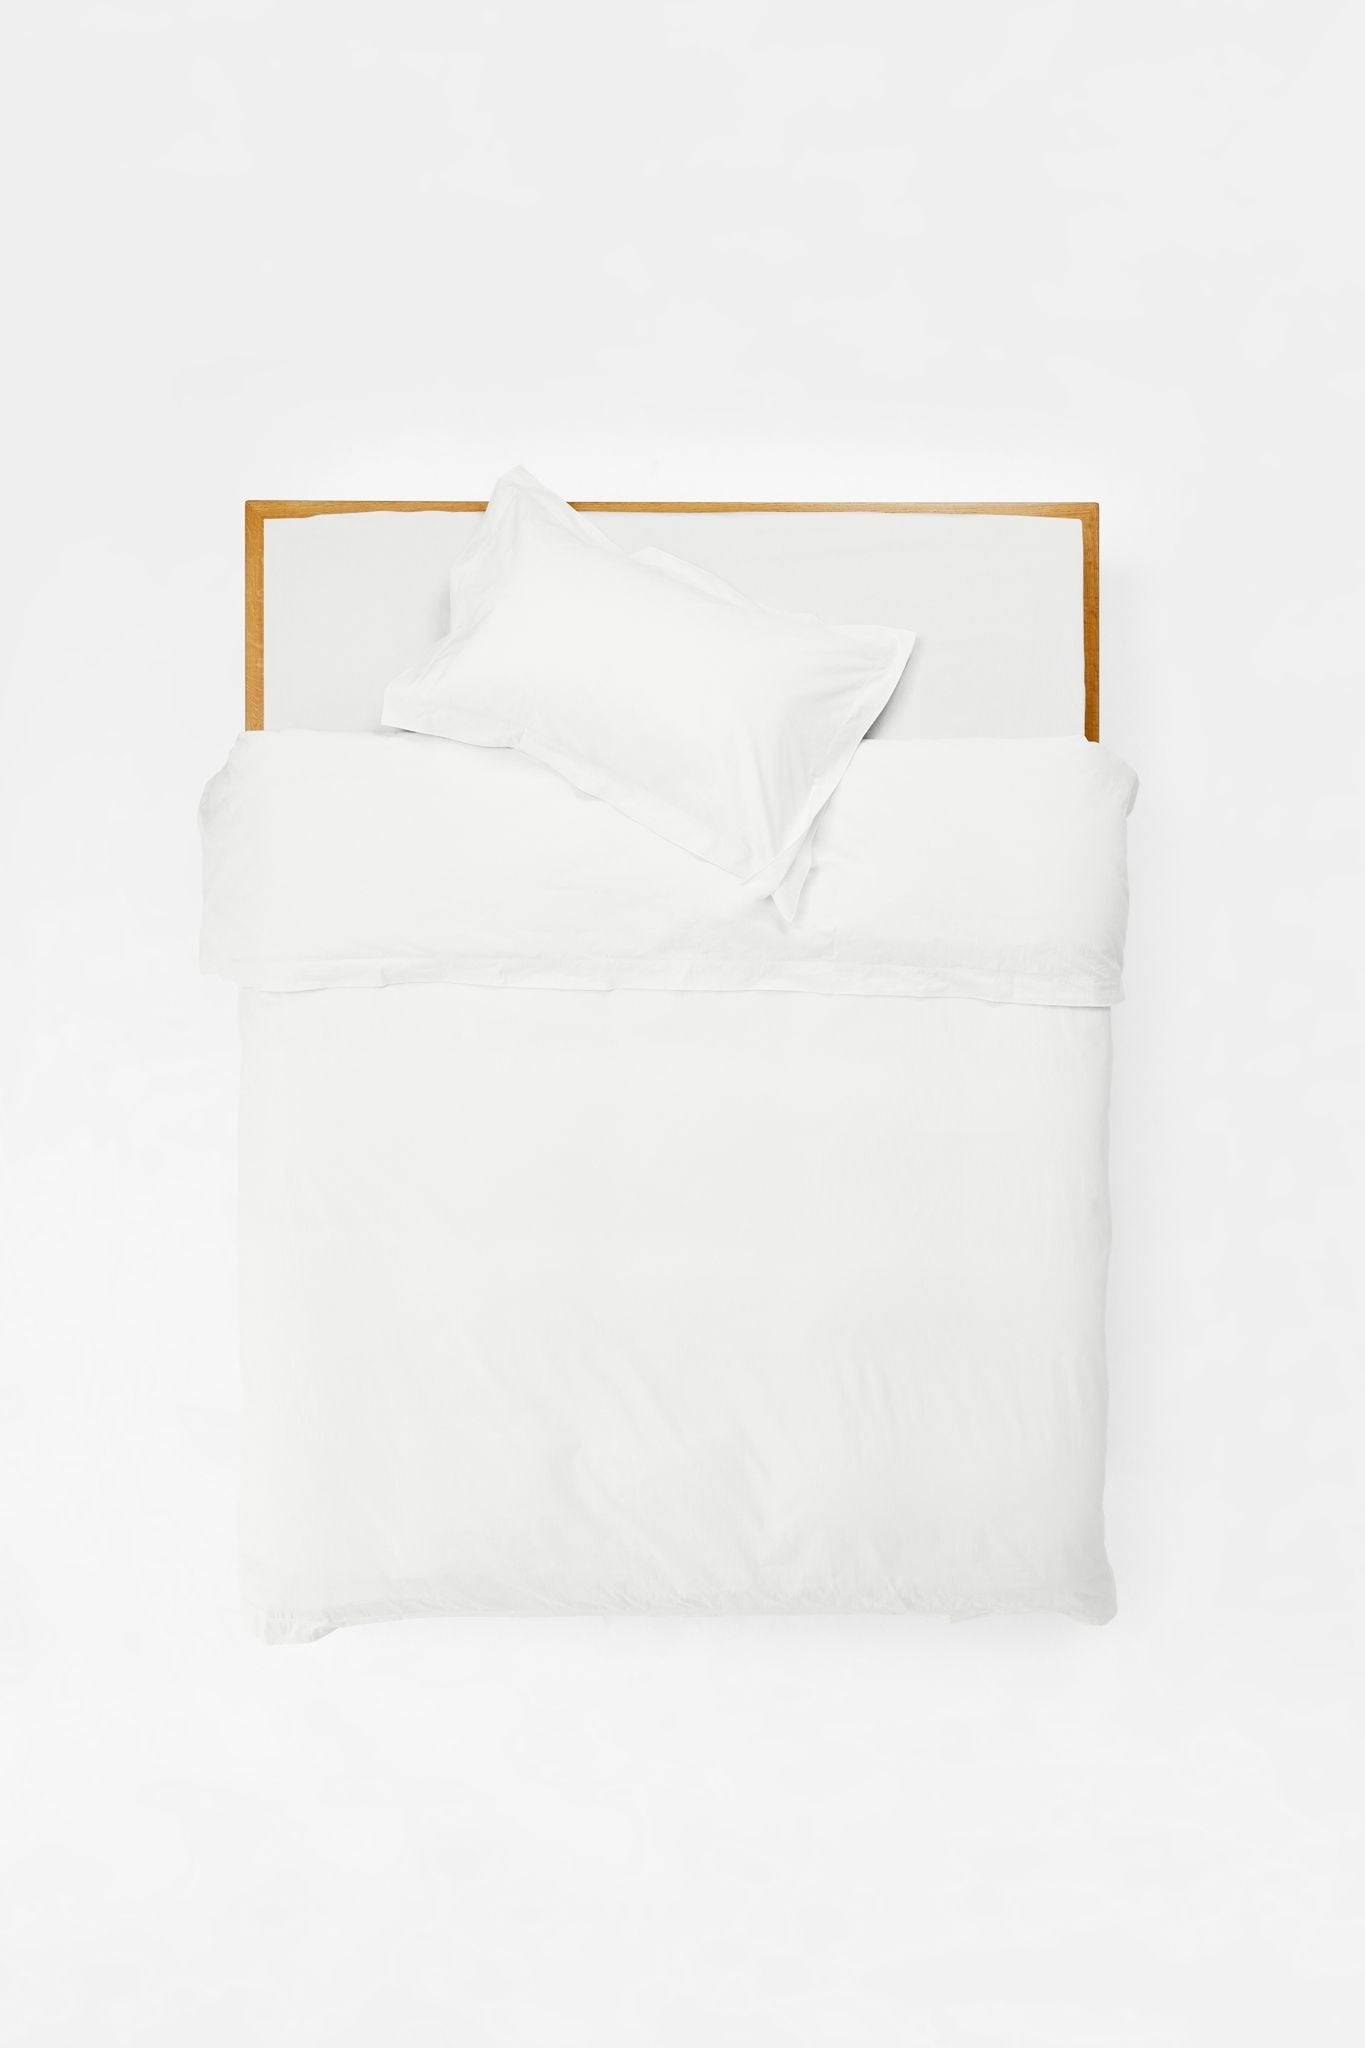 Mono Organic Cotton Percale Duvet Cover - Prism Duvet Covers in Super King